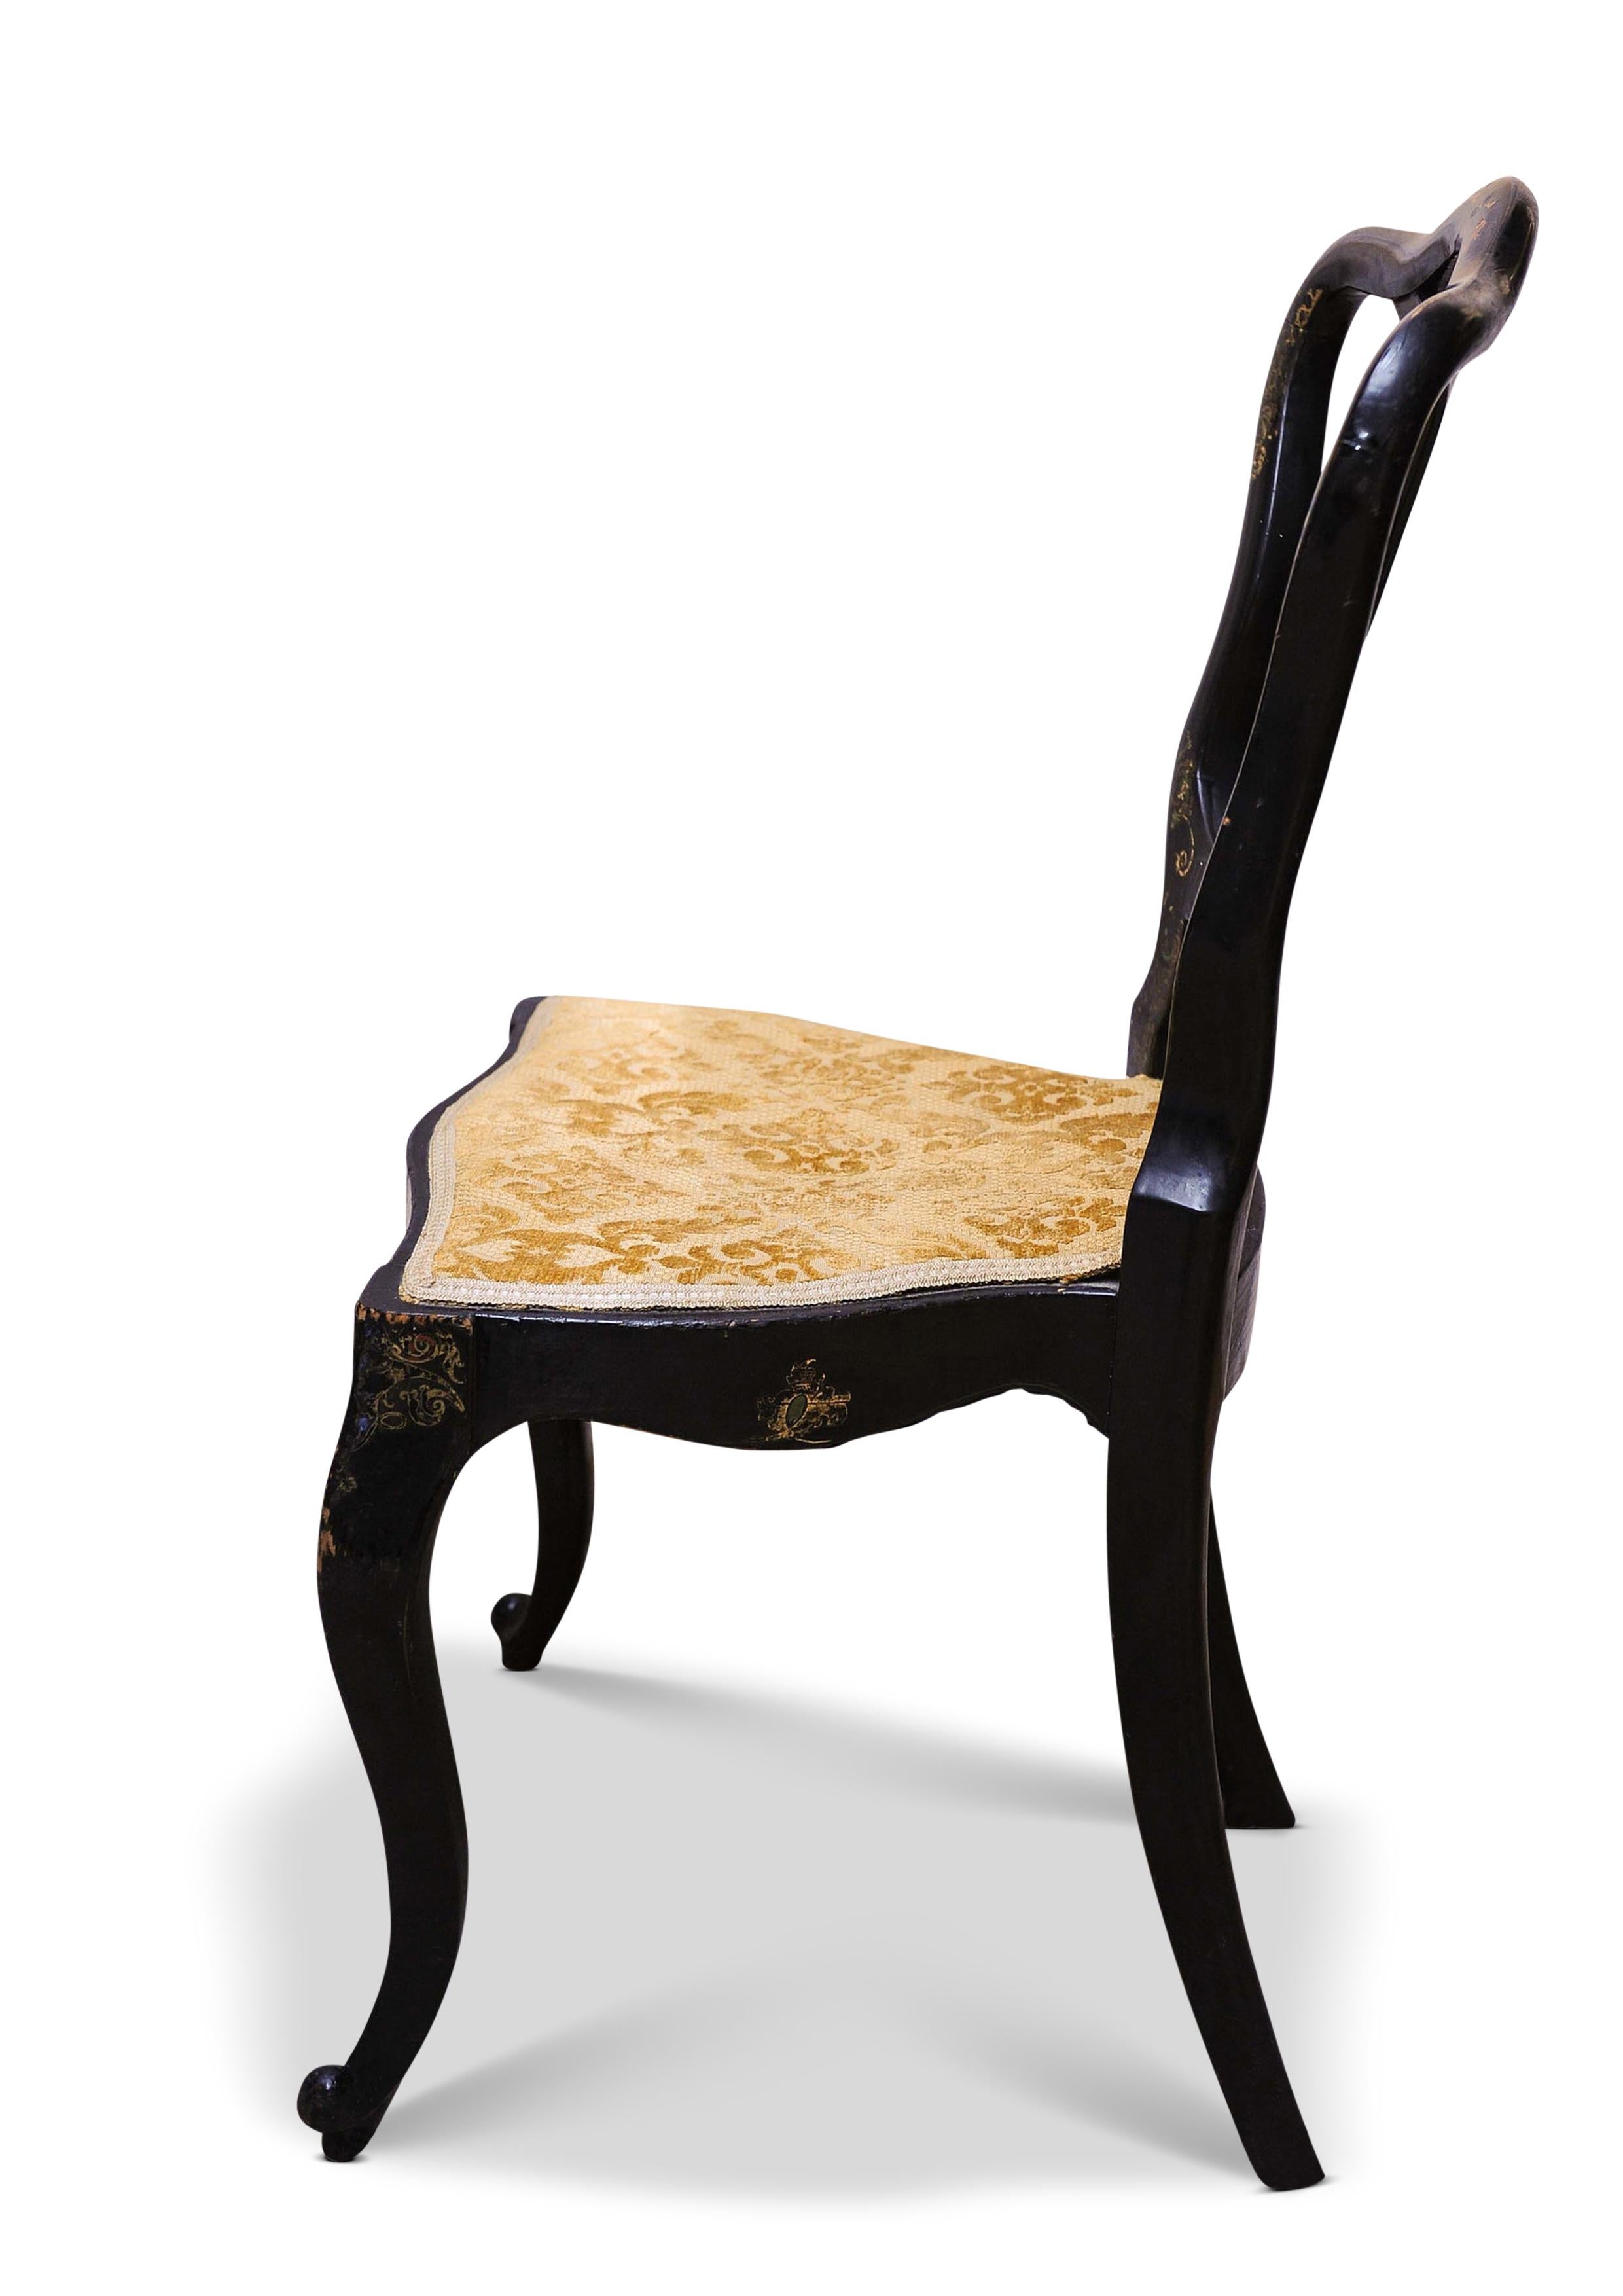 A Victorian Jennens & Bettridge Black Lacquered & Gilt Decorative Hallway Chair upon Cabriole Legs 

Decorative chair utilising the Victorian art form of papier mache & indochine.  

Brand name stamped to underframe 

The company of Jennens &